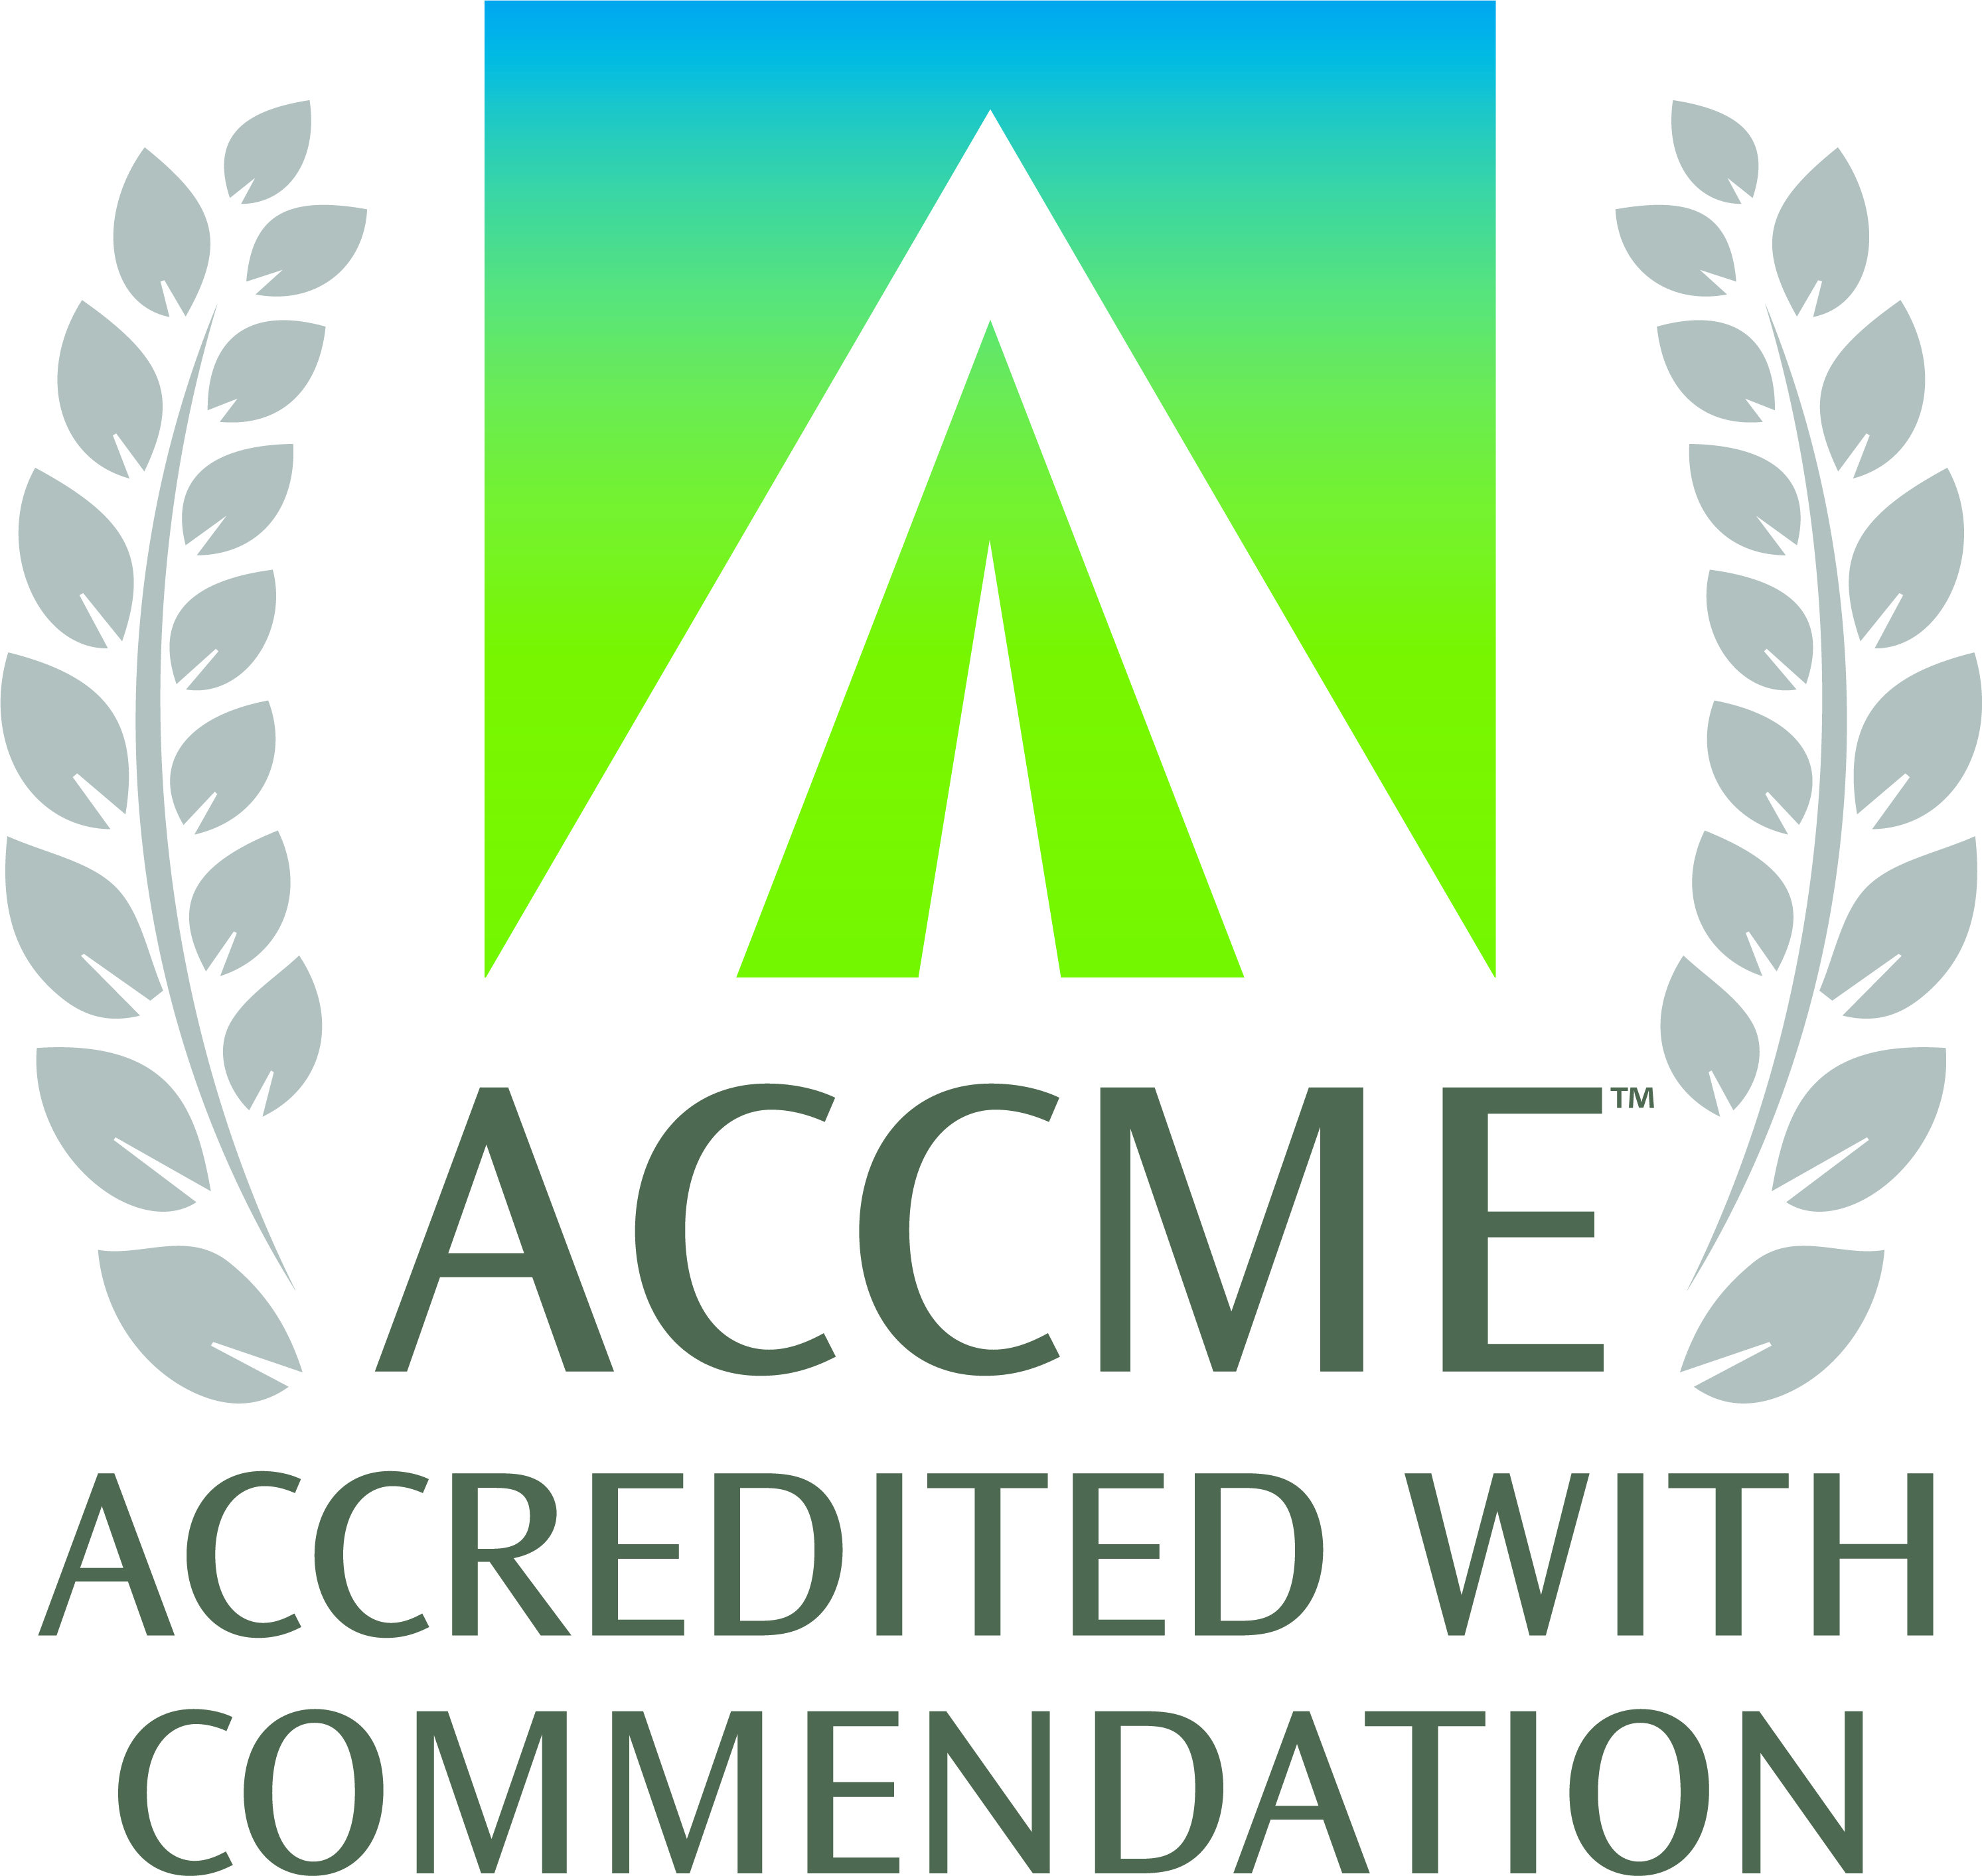 Logo for the European Board for Accreditation of Continuing Education for Health Professionals